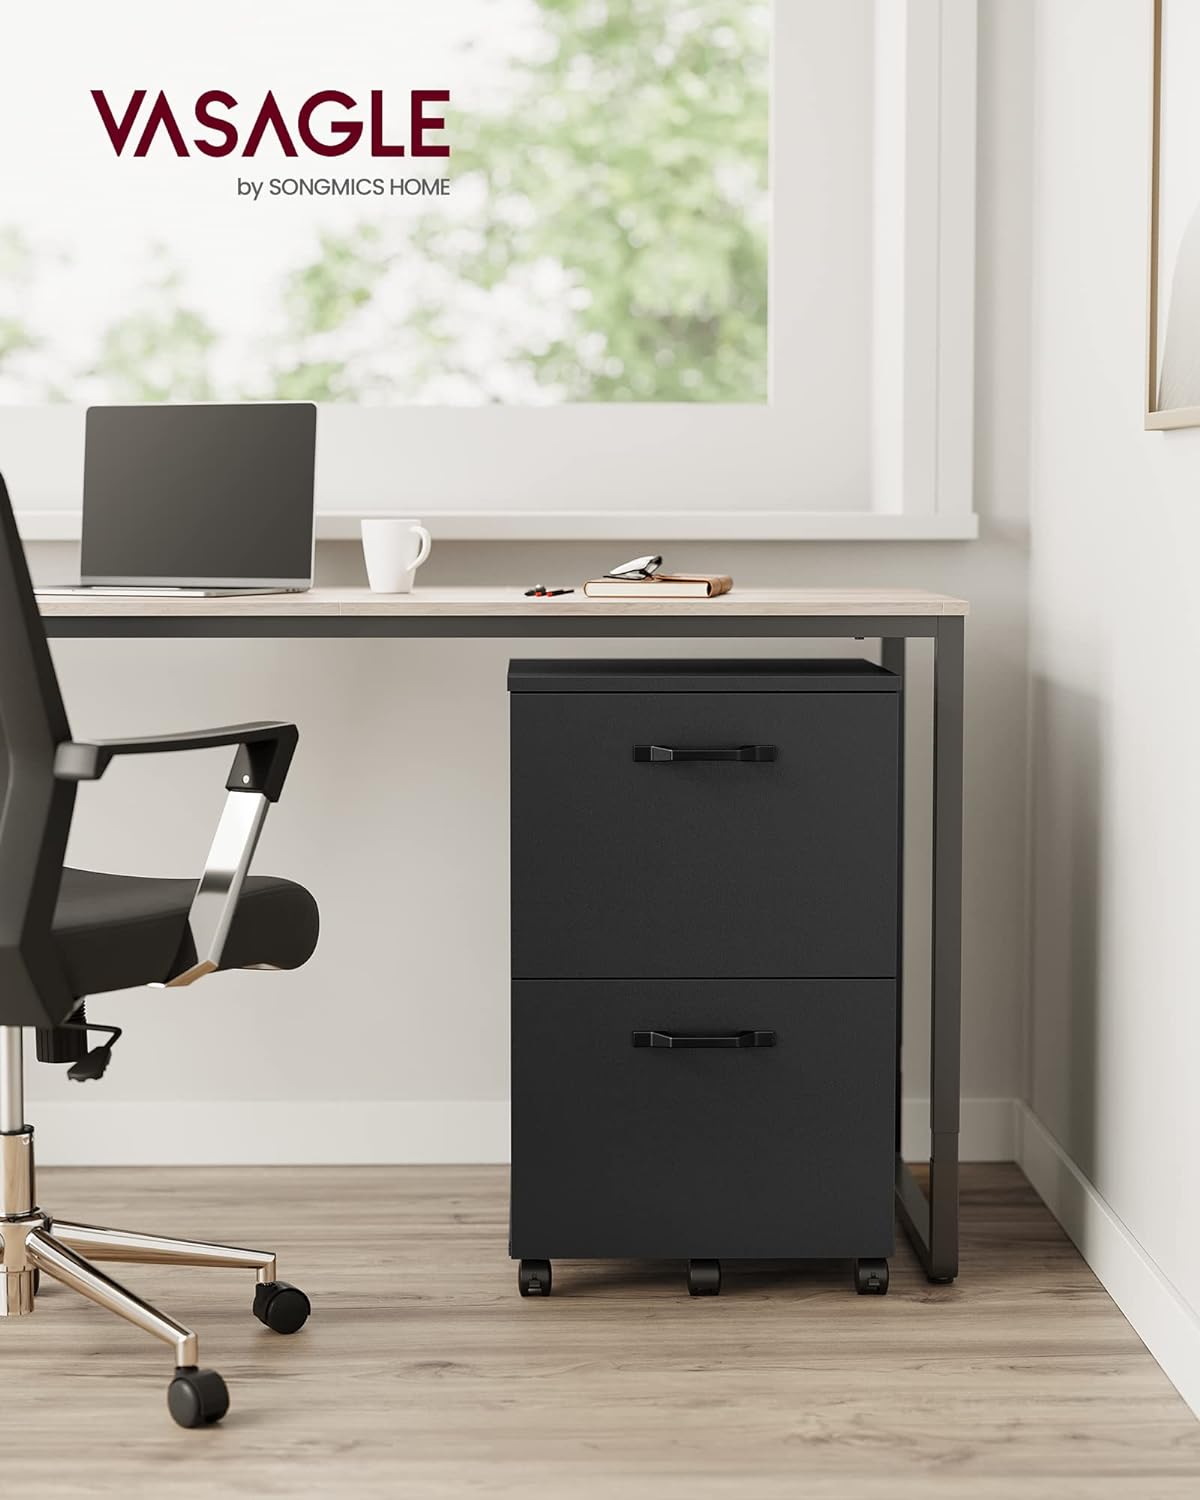 2-Drawer Filing Cabinet, Mobile File Cabinet for Home Office